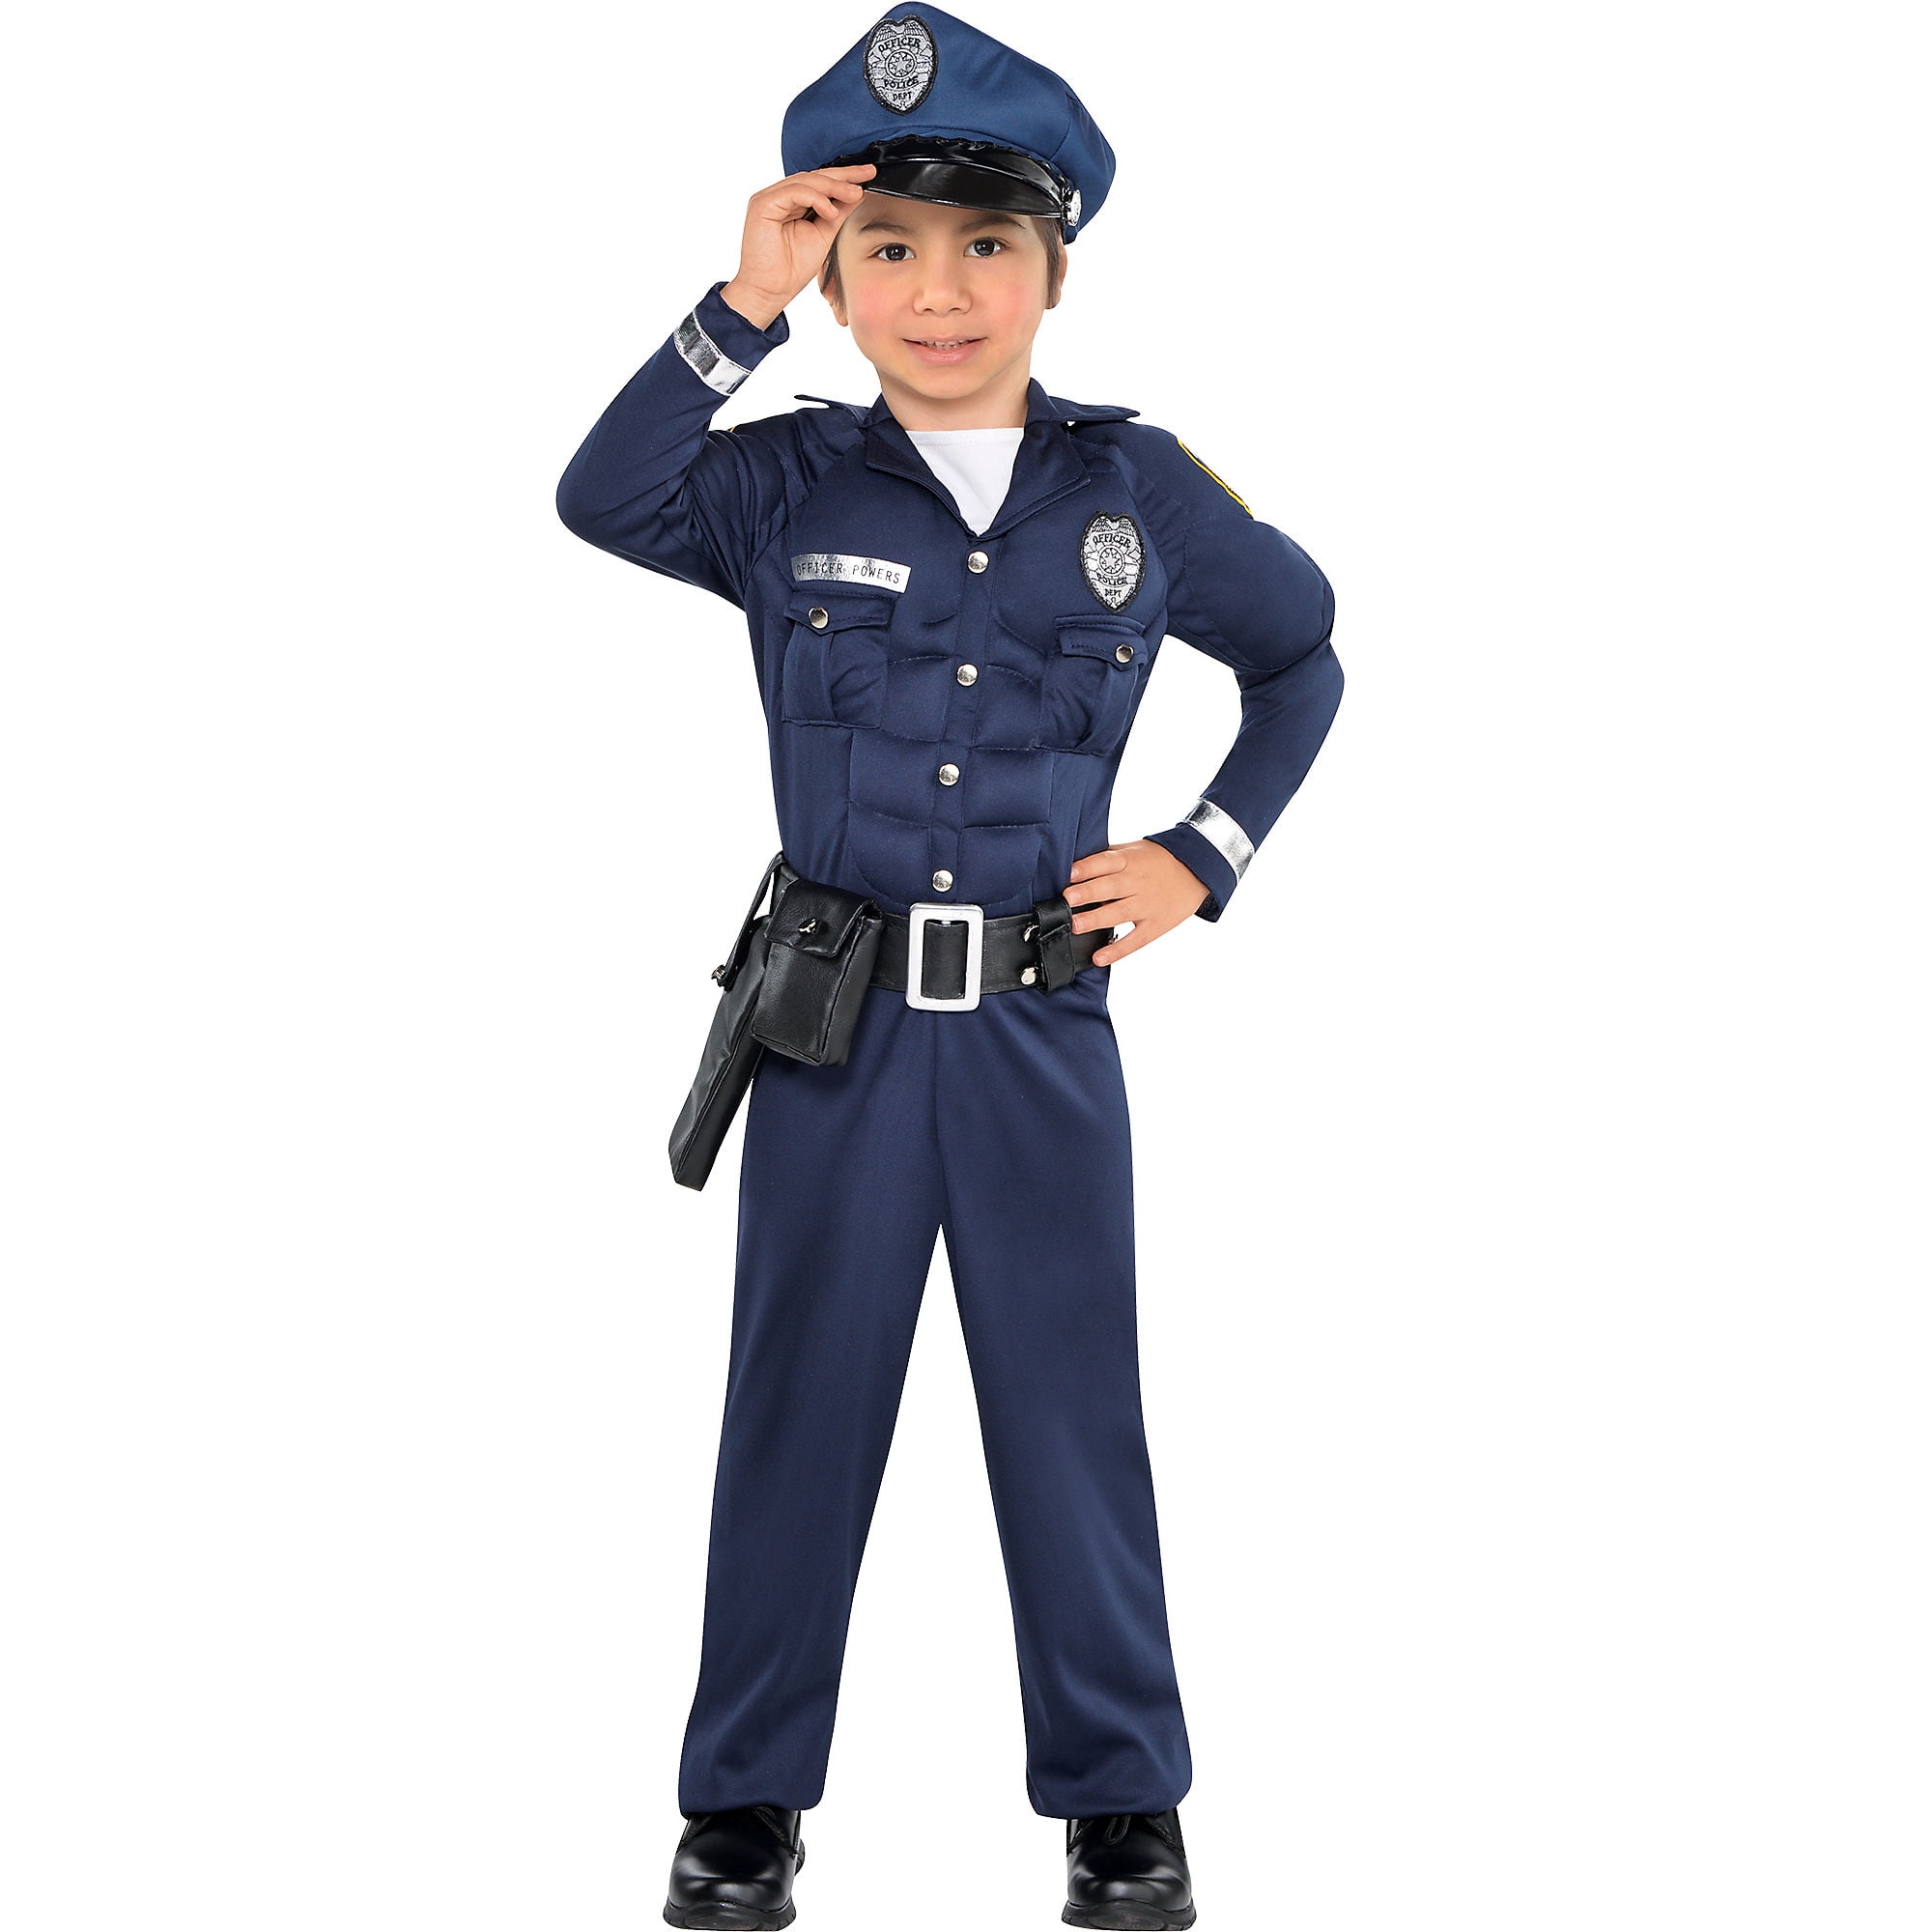 Boys American Cop Police Uniform Emergency Services Fancy Dress Costume Outfit 